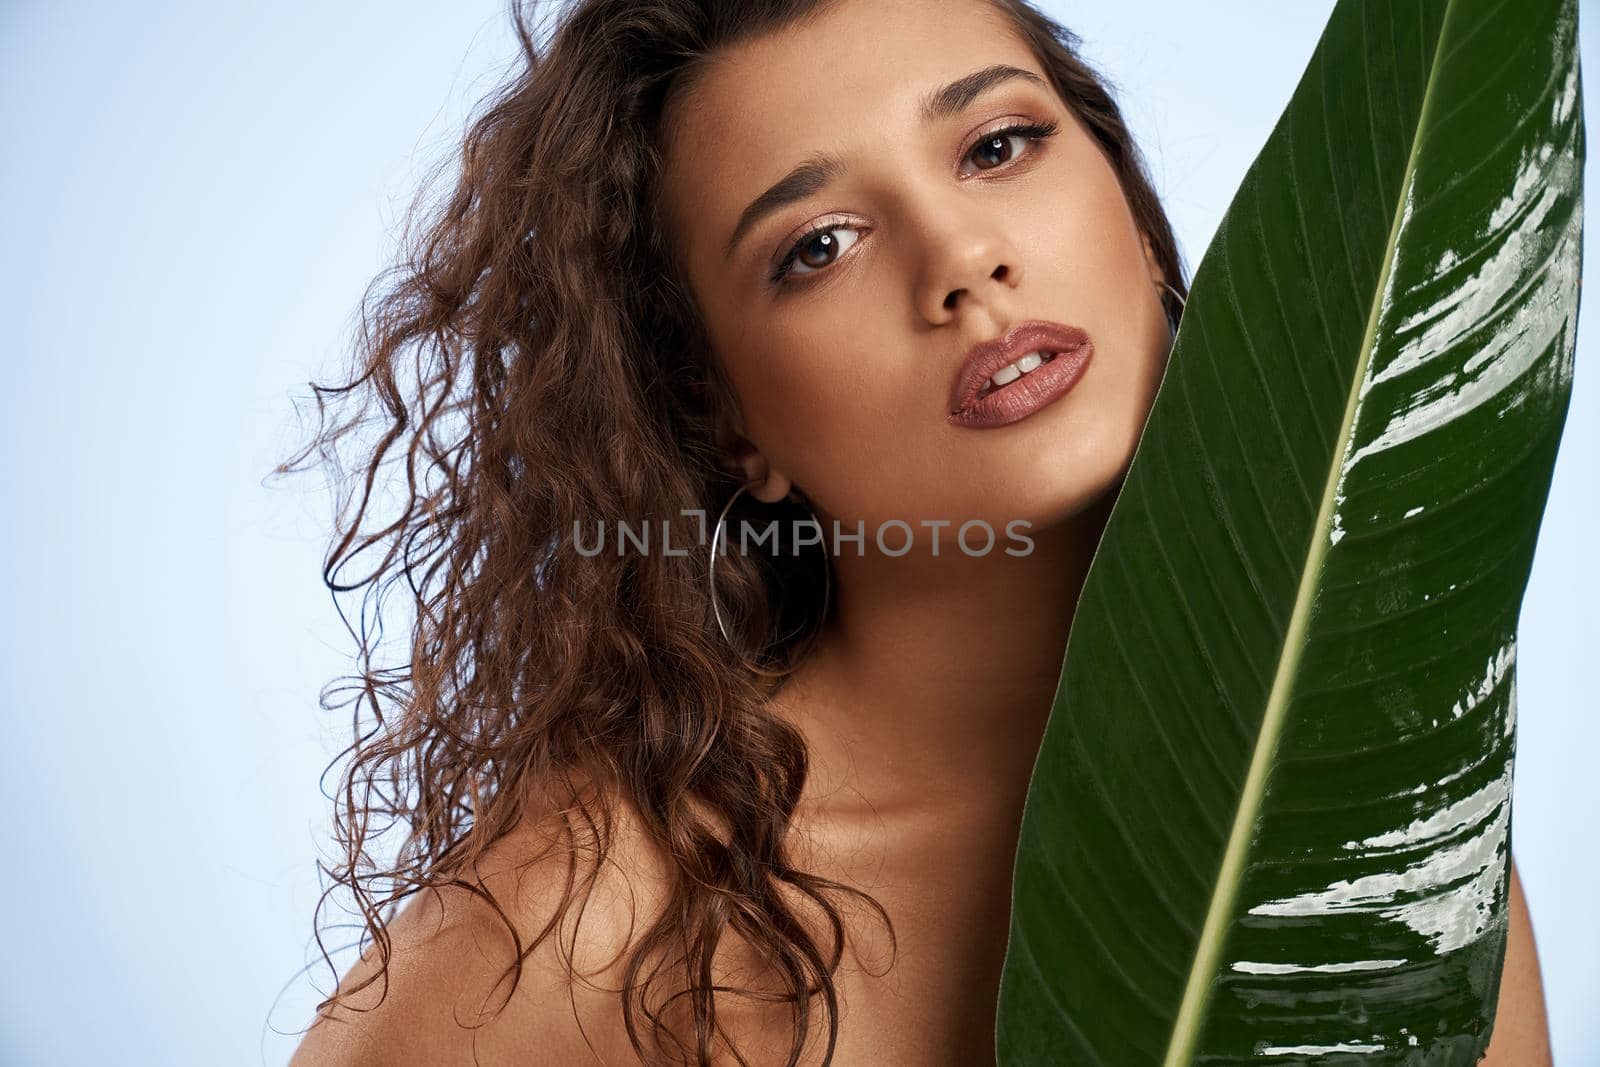 Close up of beautiful naked female model standing and looking at camera. Crop portrait of young brunette woman with perfect makeup posing with mouth open, holding big green leaf, isolated on blue.